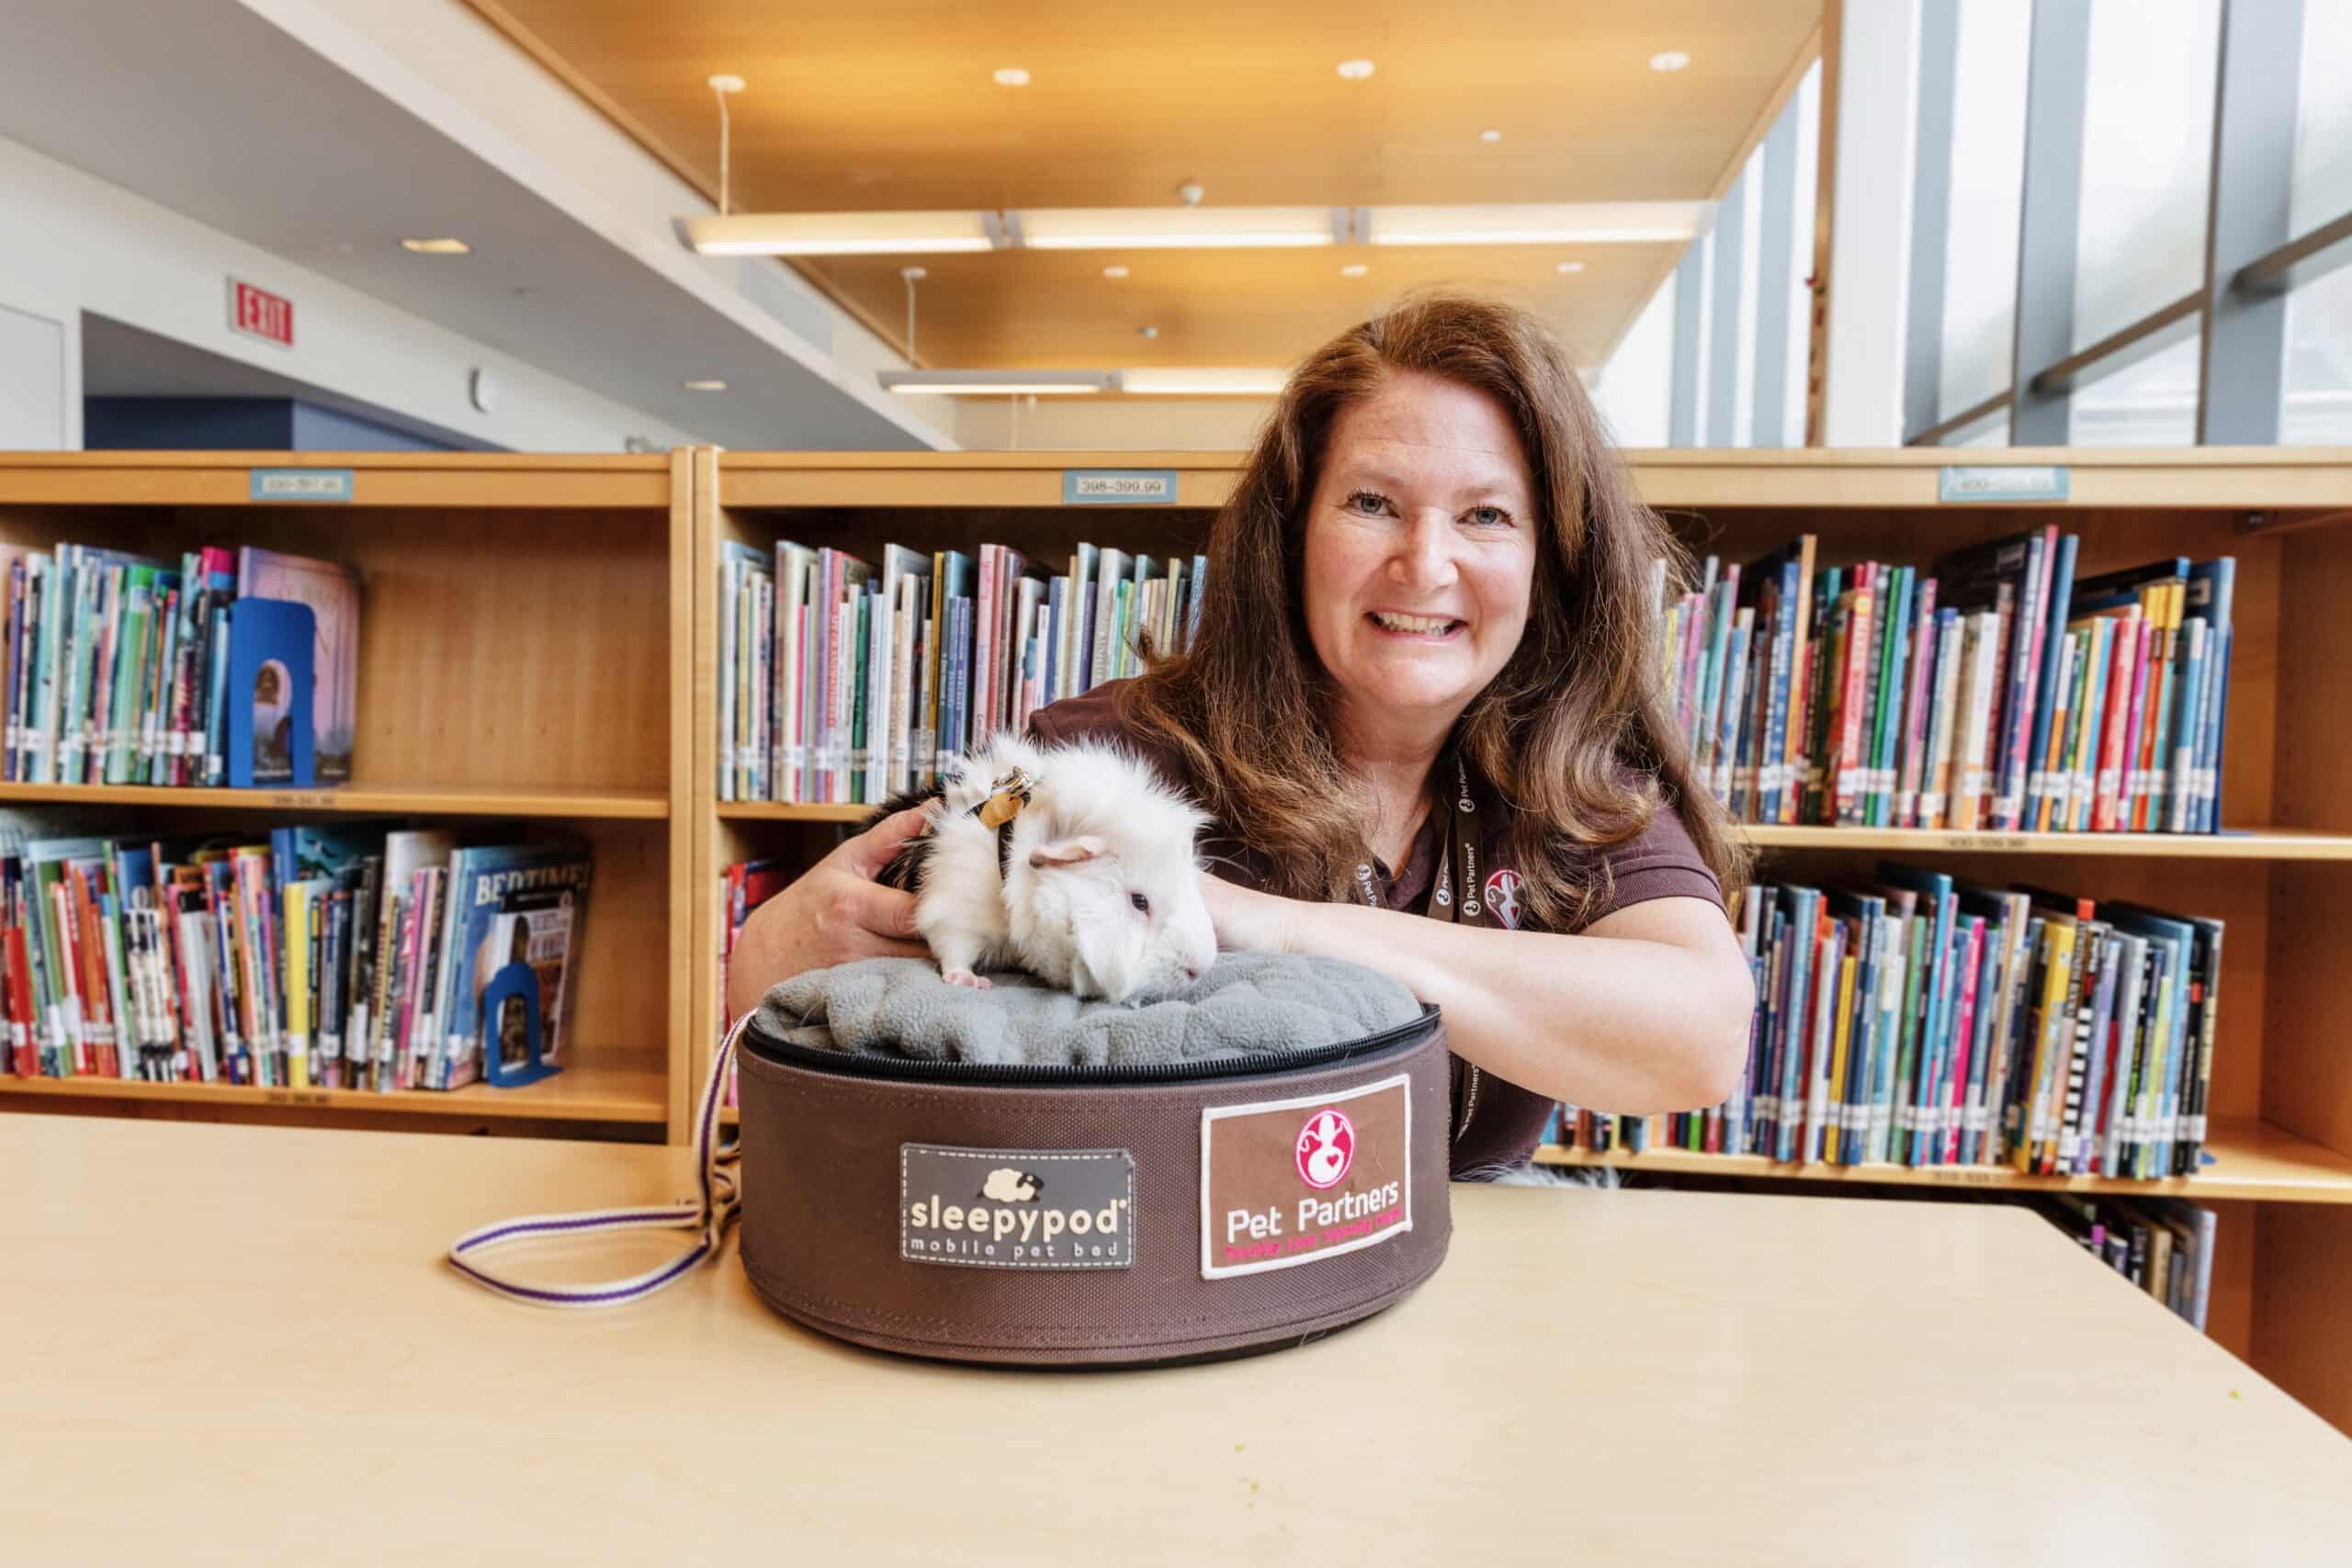 Guinea Pig Therapy Animal Makes Big Impact on School